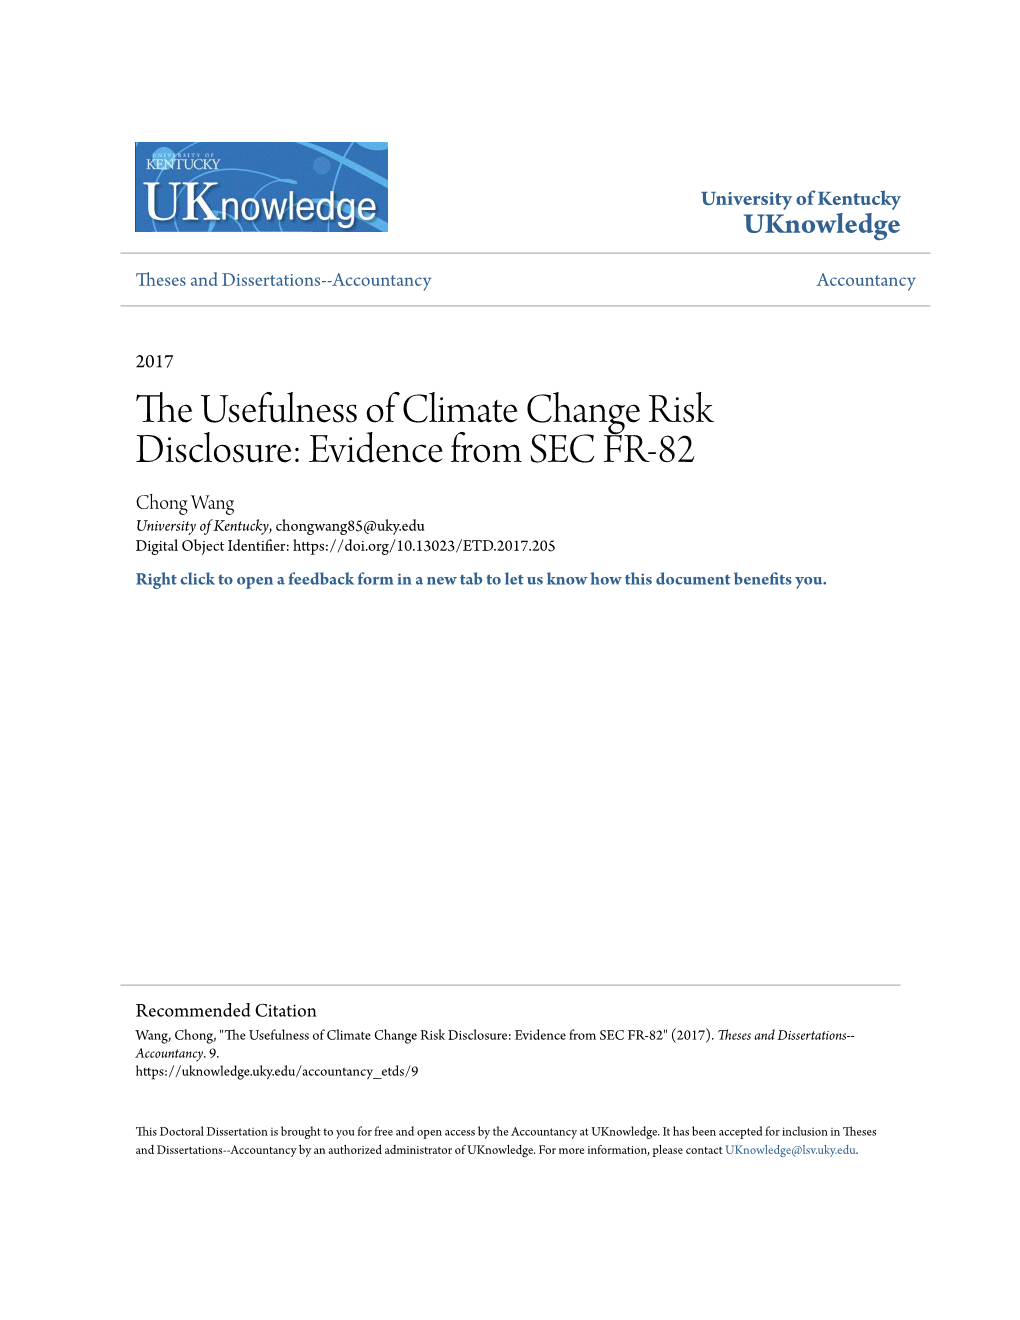 The Usefulness of Climate Change Risk Disclosure: Evidence from Sec Fr-82